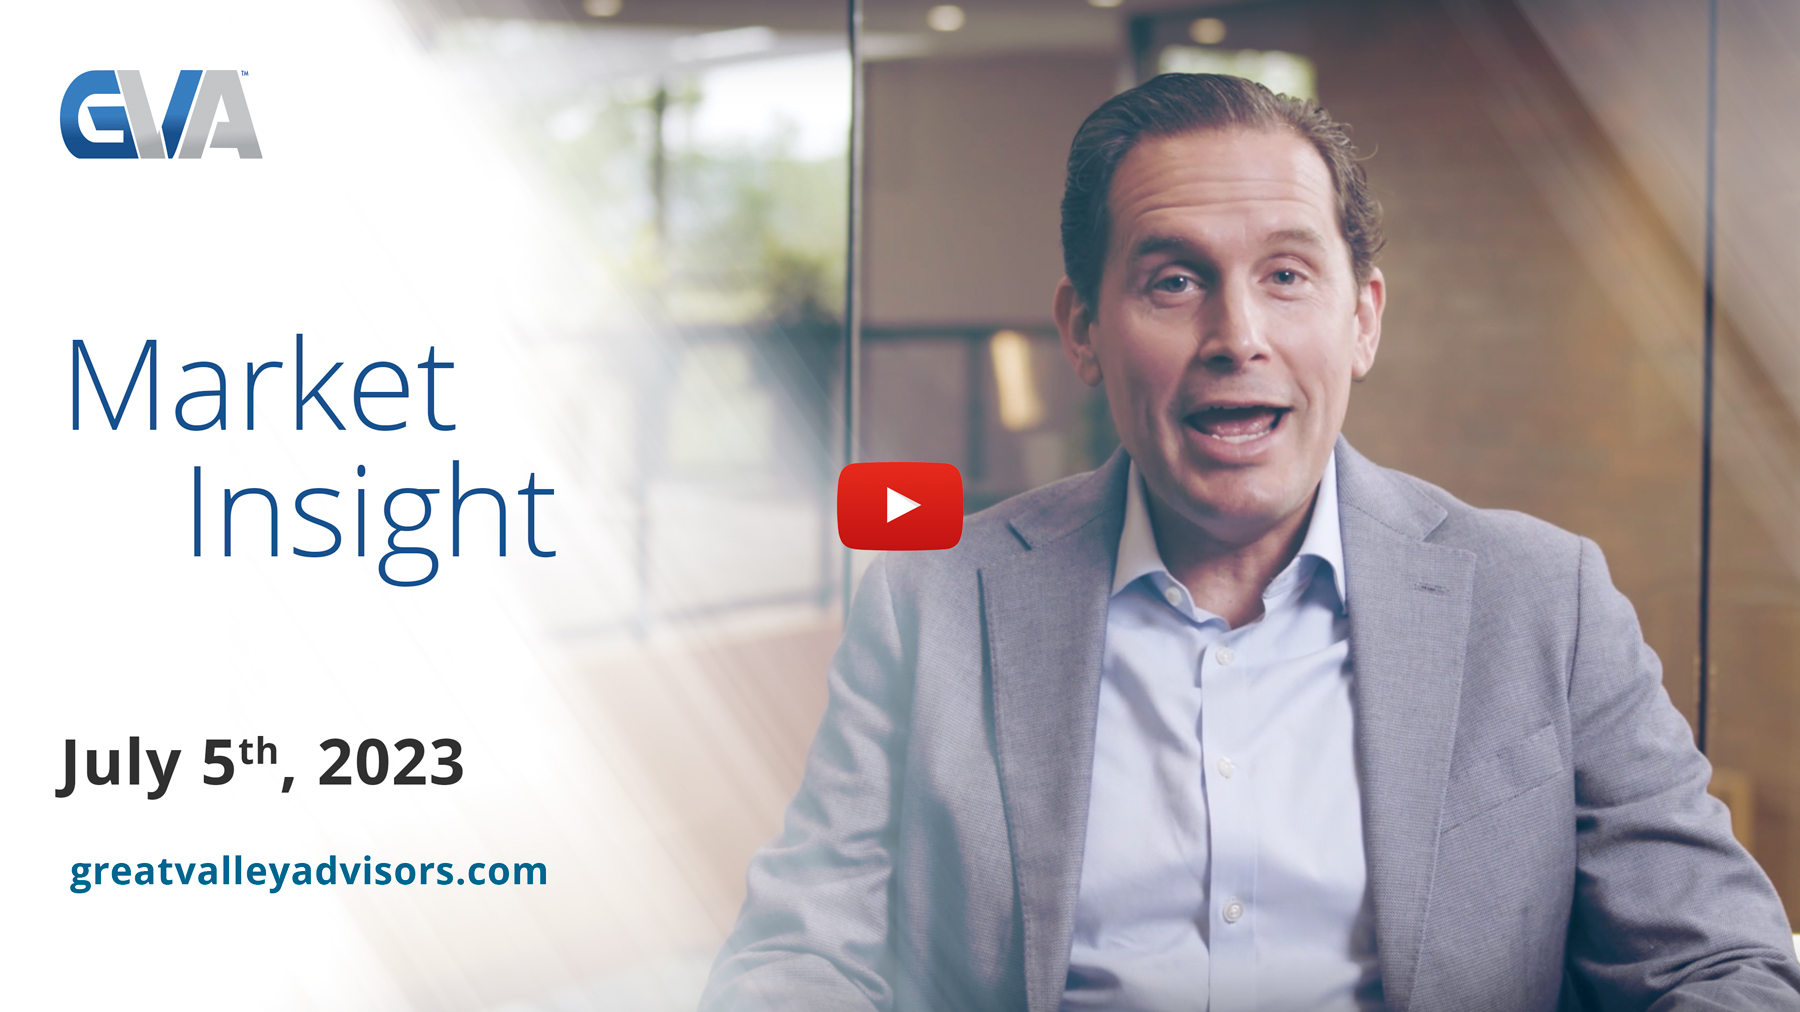 Market Insights with Eric: Episode 4, July 5th, 2023